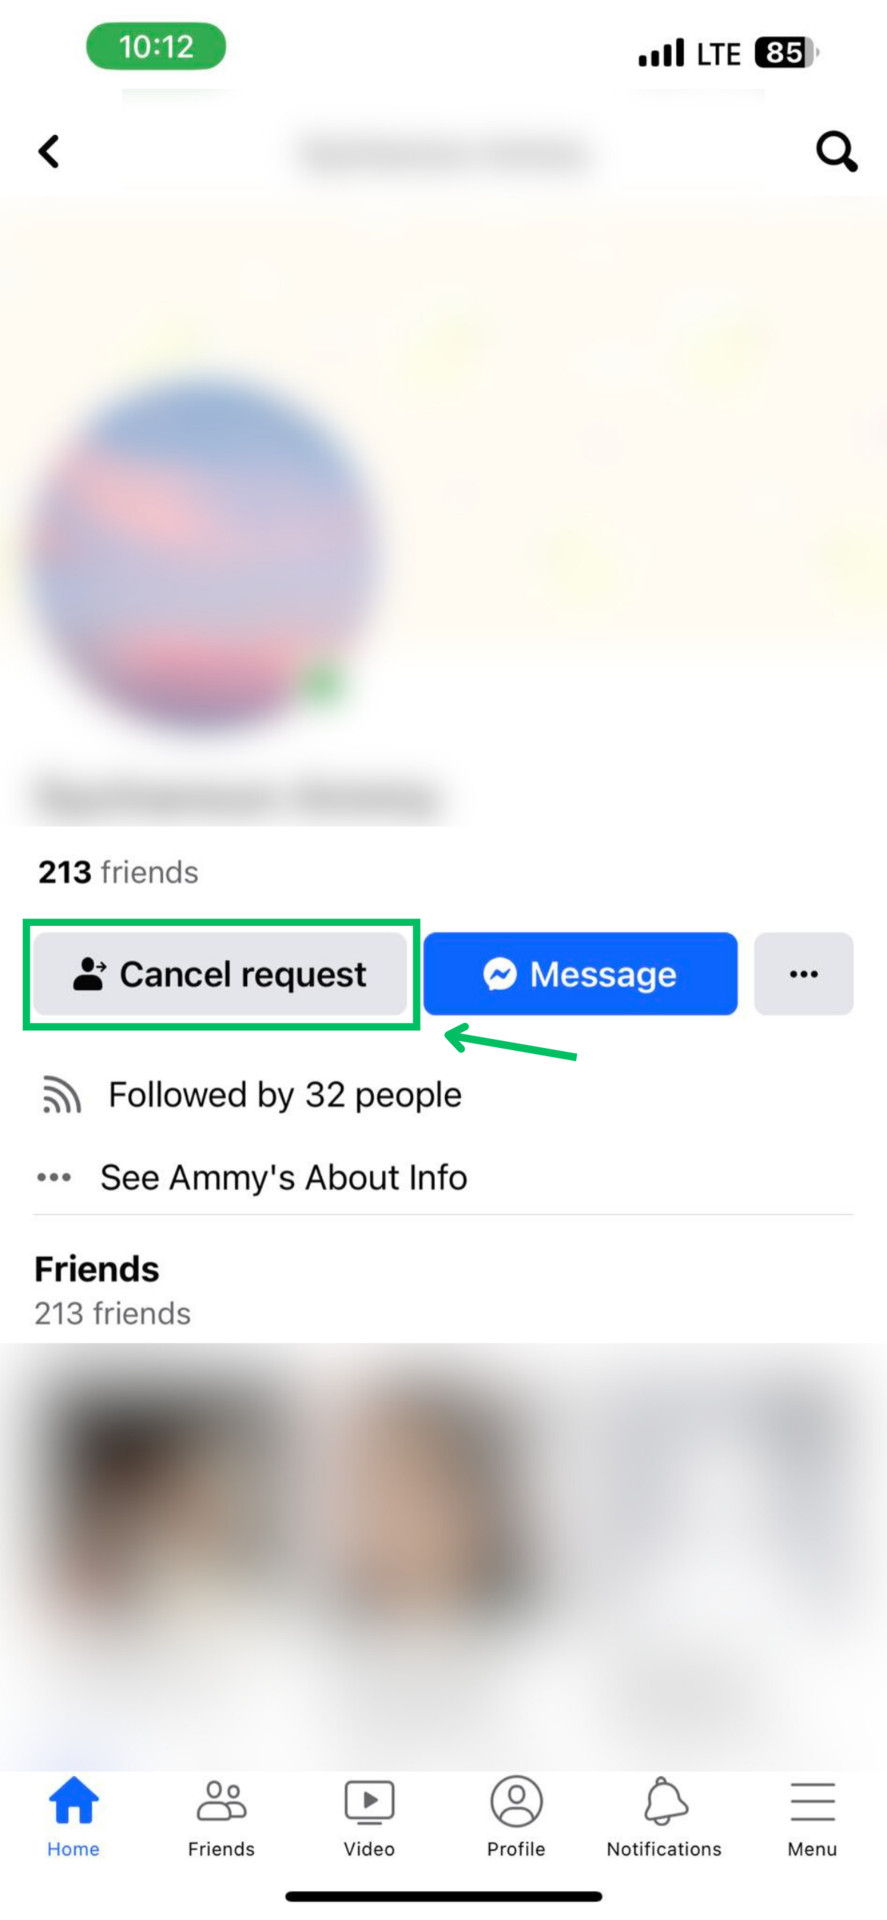 Select Cancel request